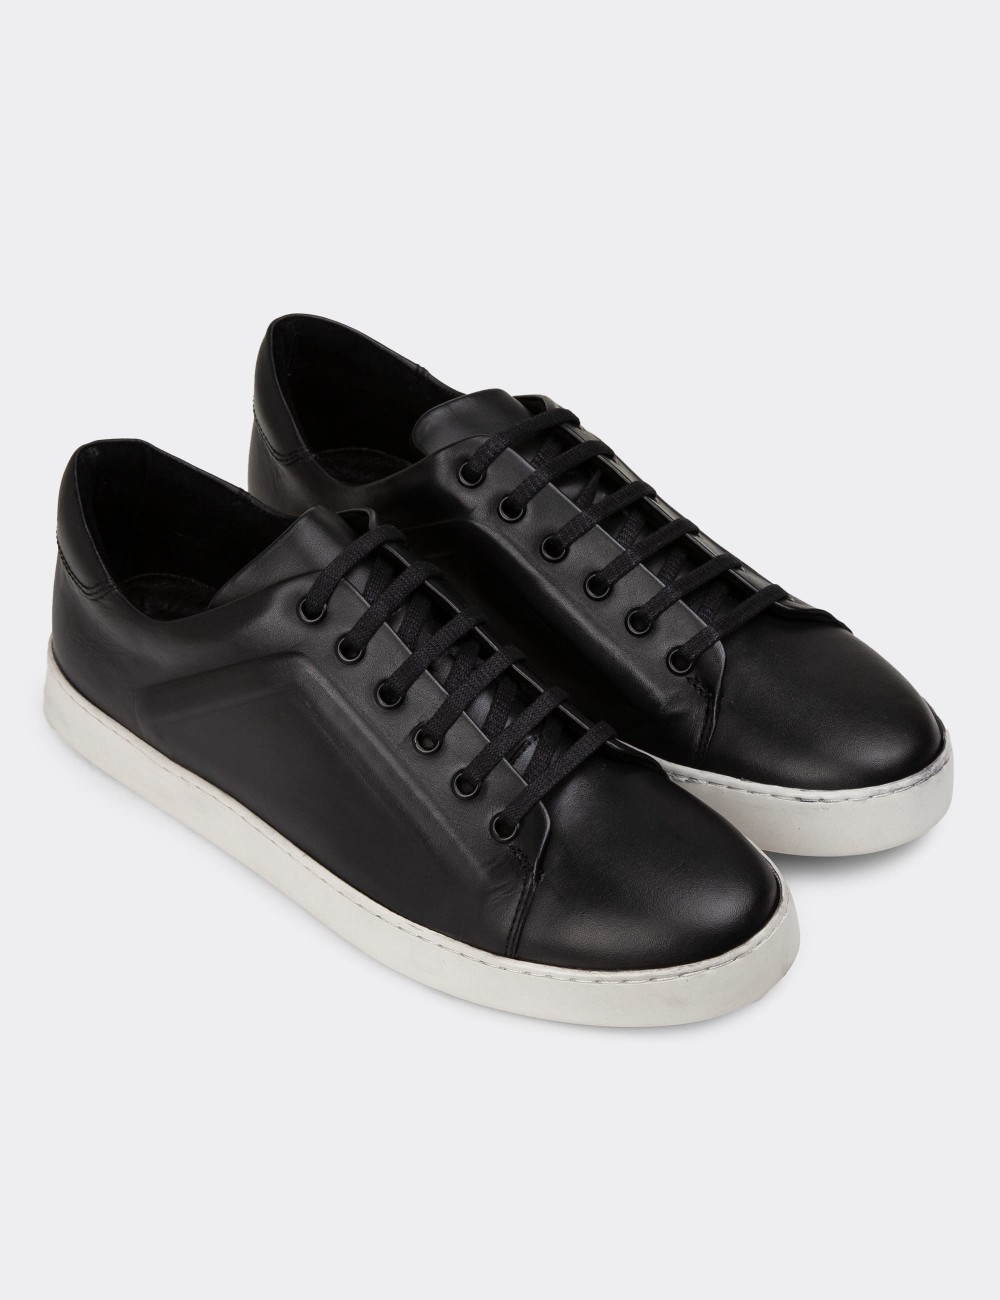 Black Leather Sneakers - 01956MSYHC02